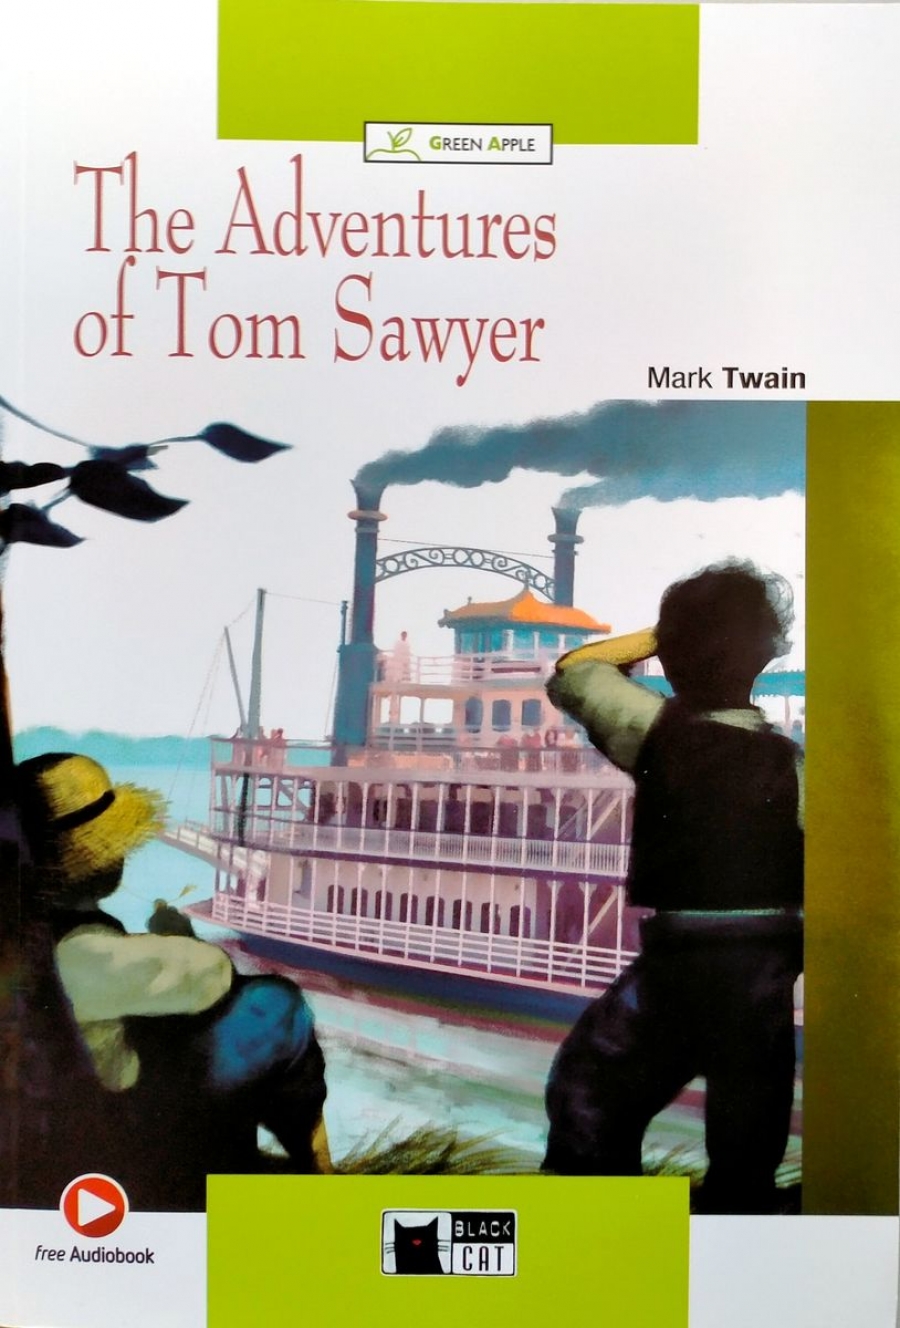 Mark Twain The Adventures of Tom Sawyer (Book with Audio CD-ROM and FREE WebActivities) 